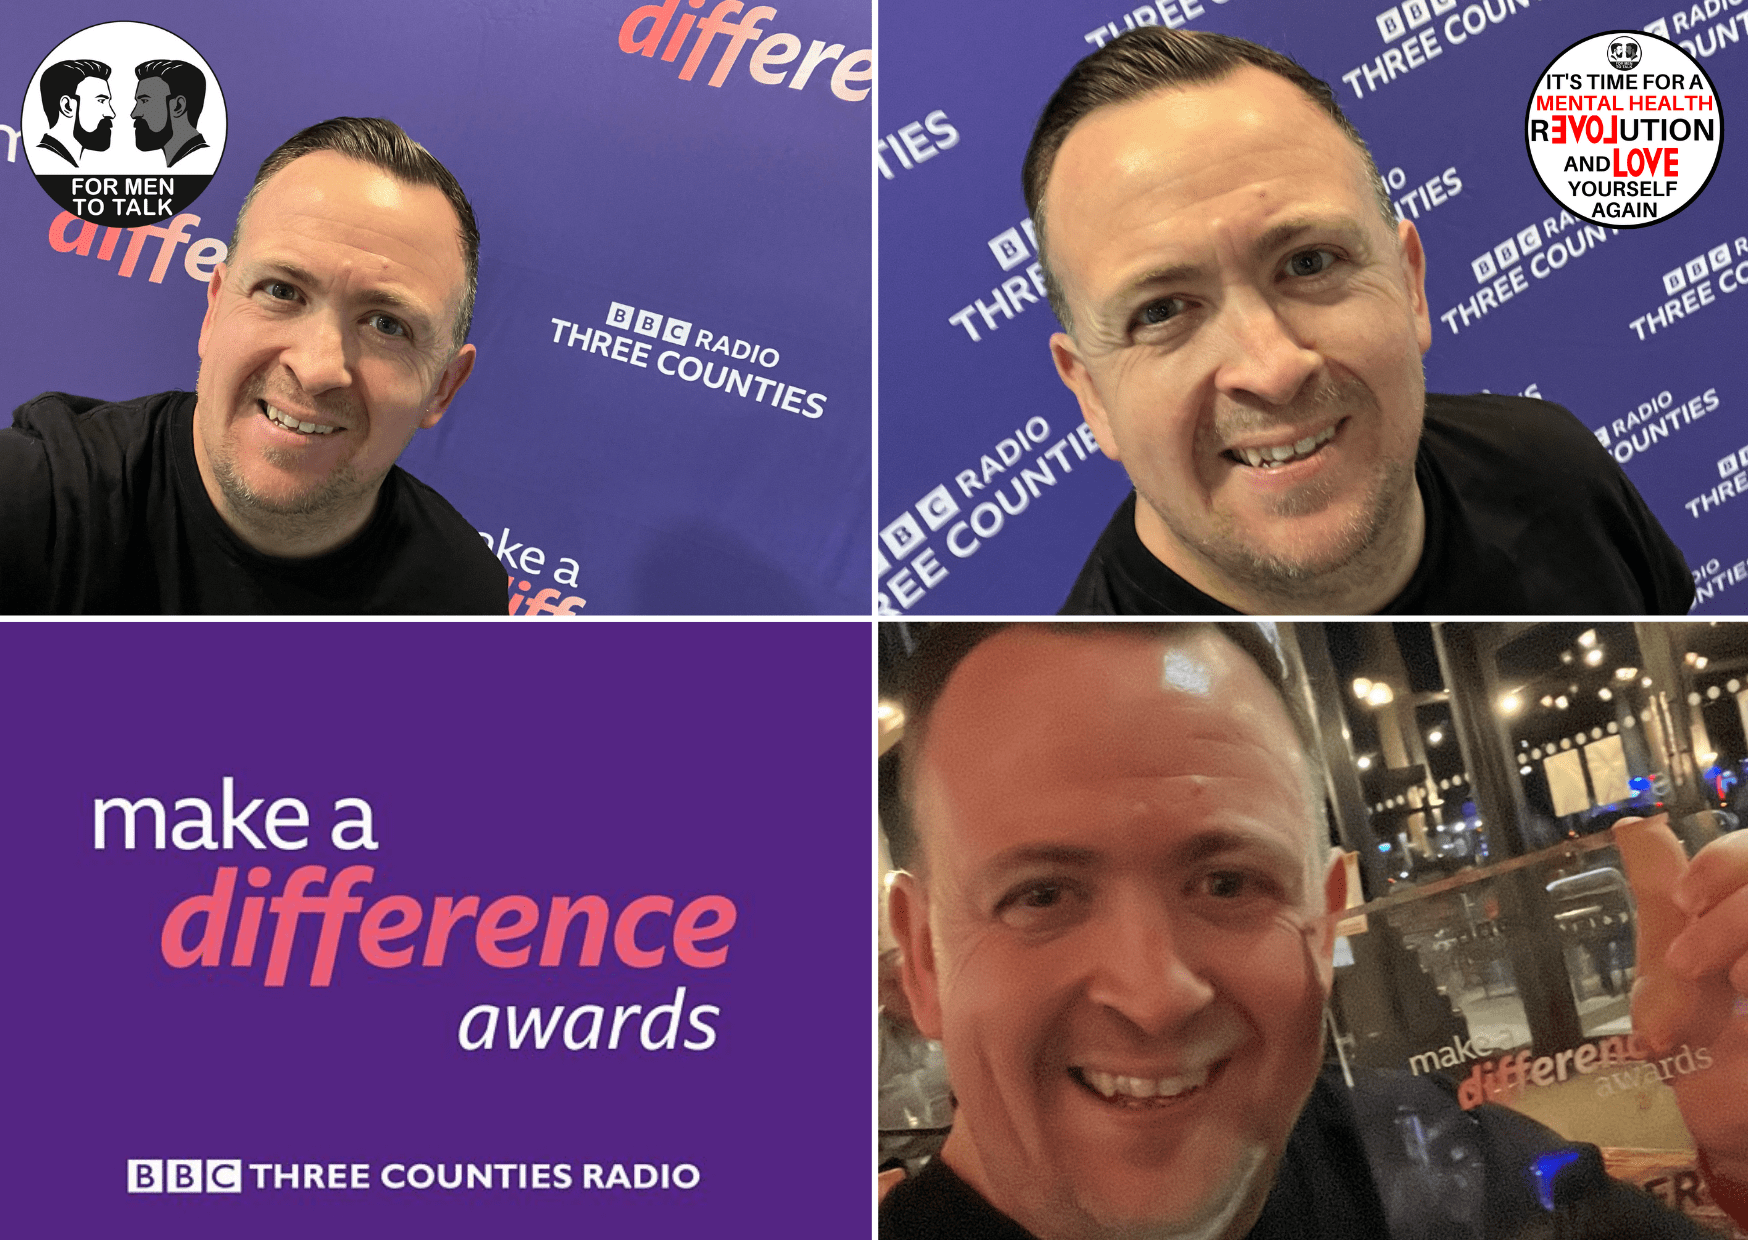 ‘For Men To Talk’ Founder Wins BBC Three Counties Radio ‘Make A Difference’ Award